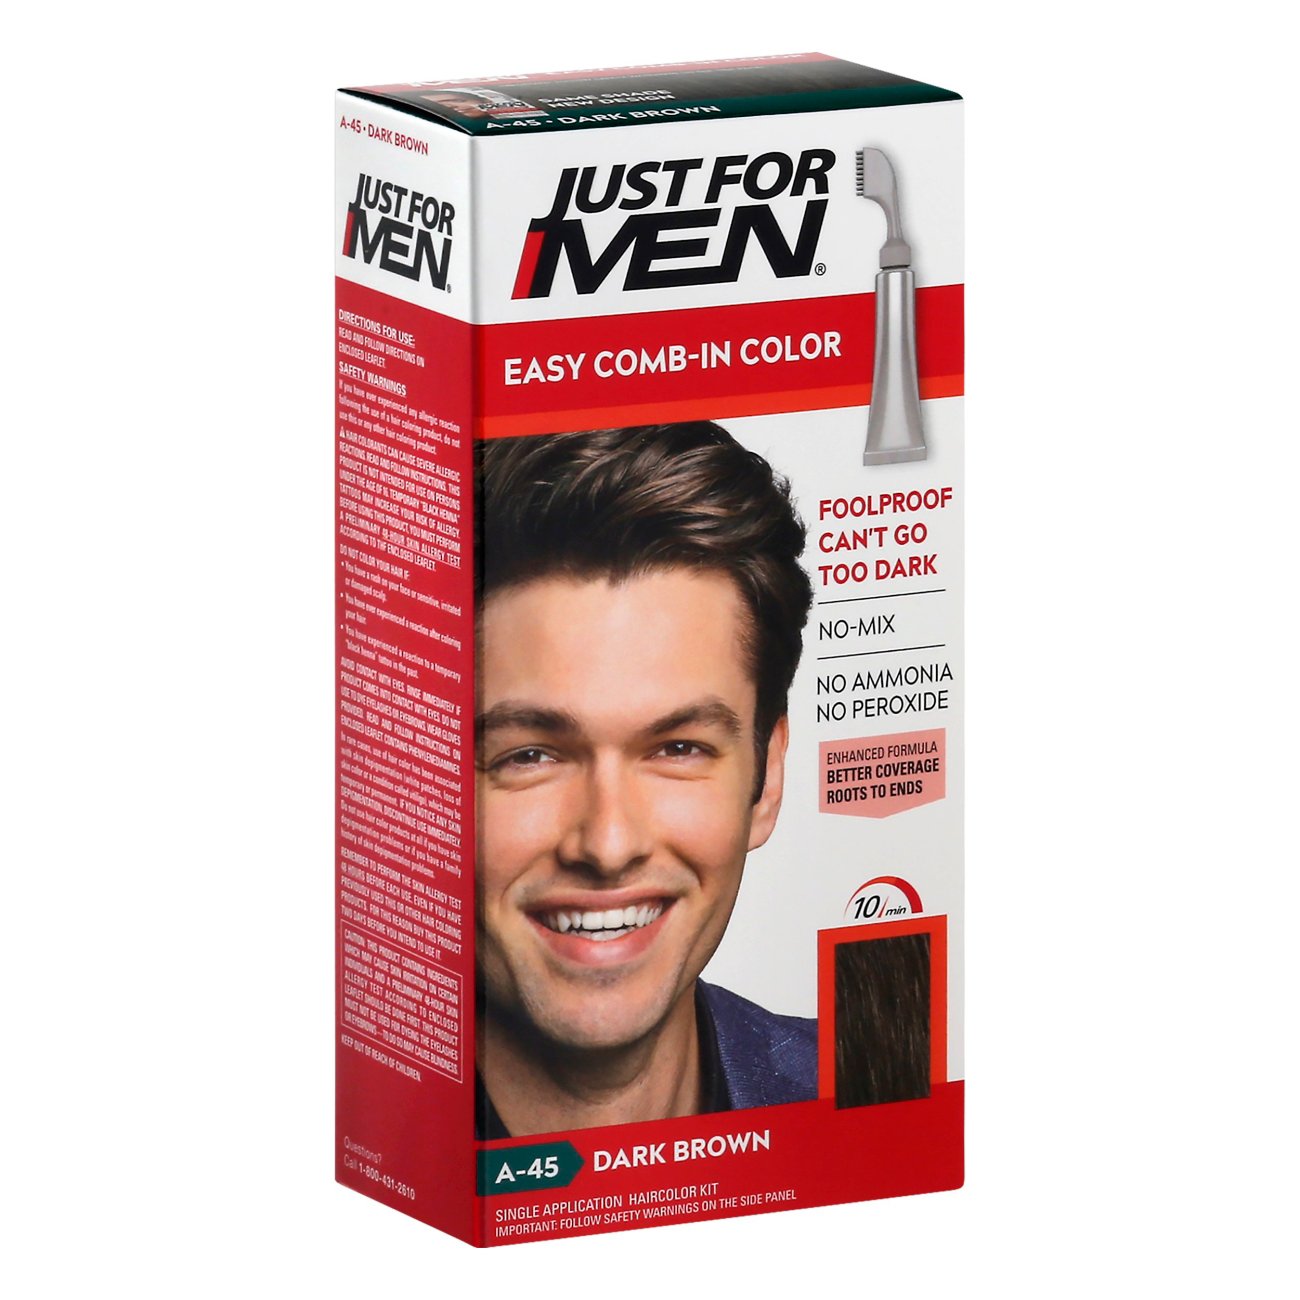 Just For Men Comb In Haircolor Dark Brown A-45 - Shop Hair Care at H-E-B